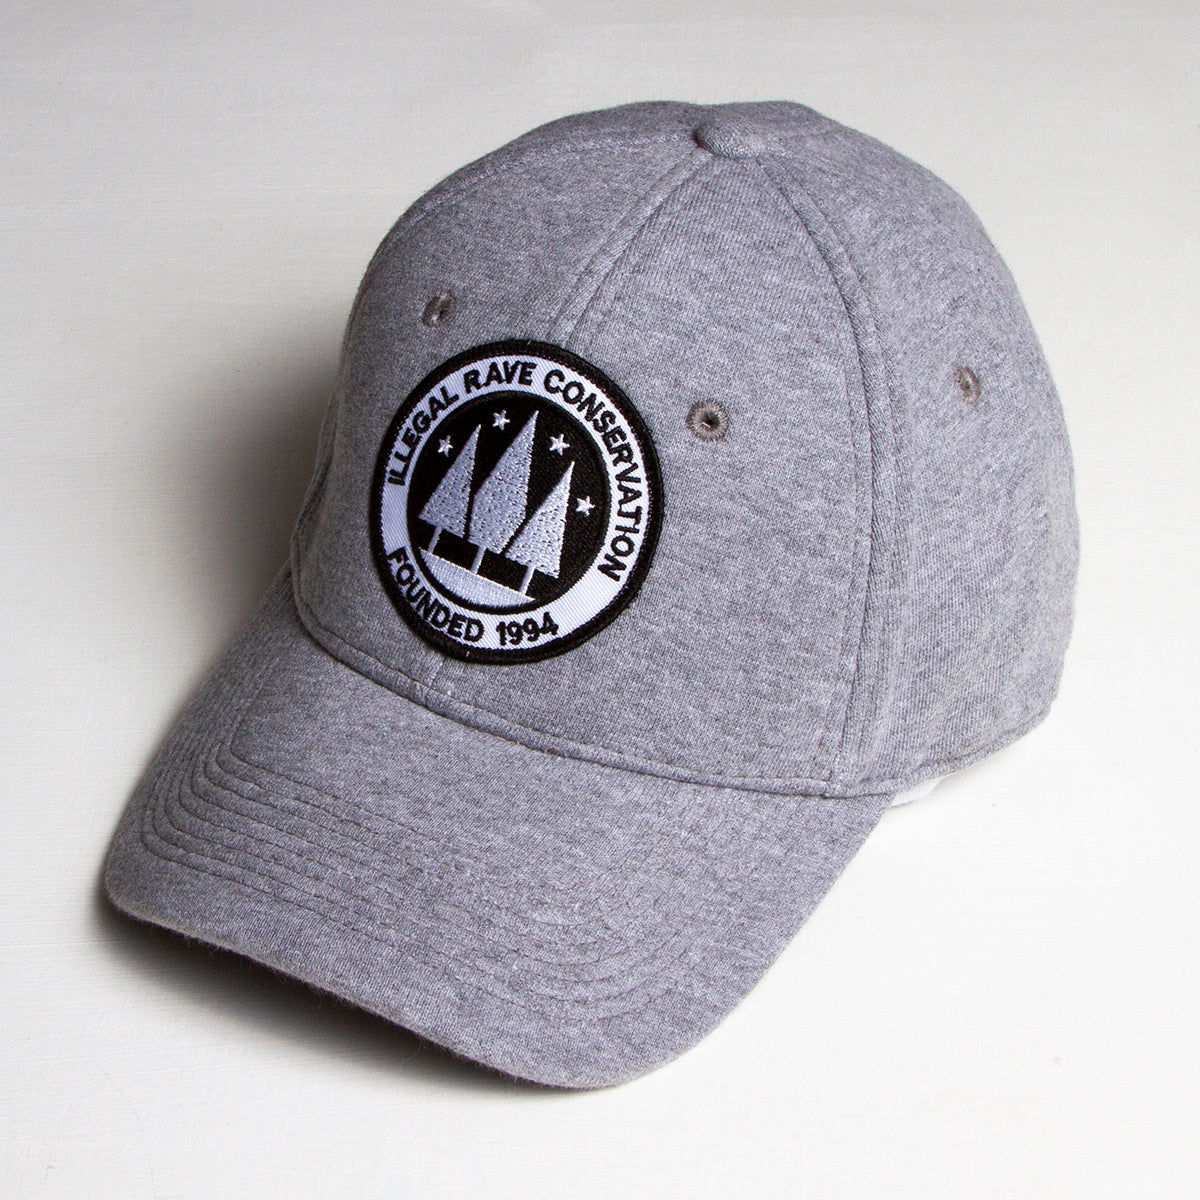 Illegal Rave - Baseball Cap - Light Grey - Wasted Heroes